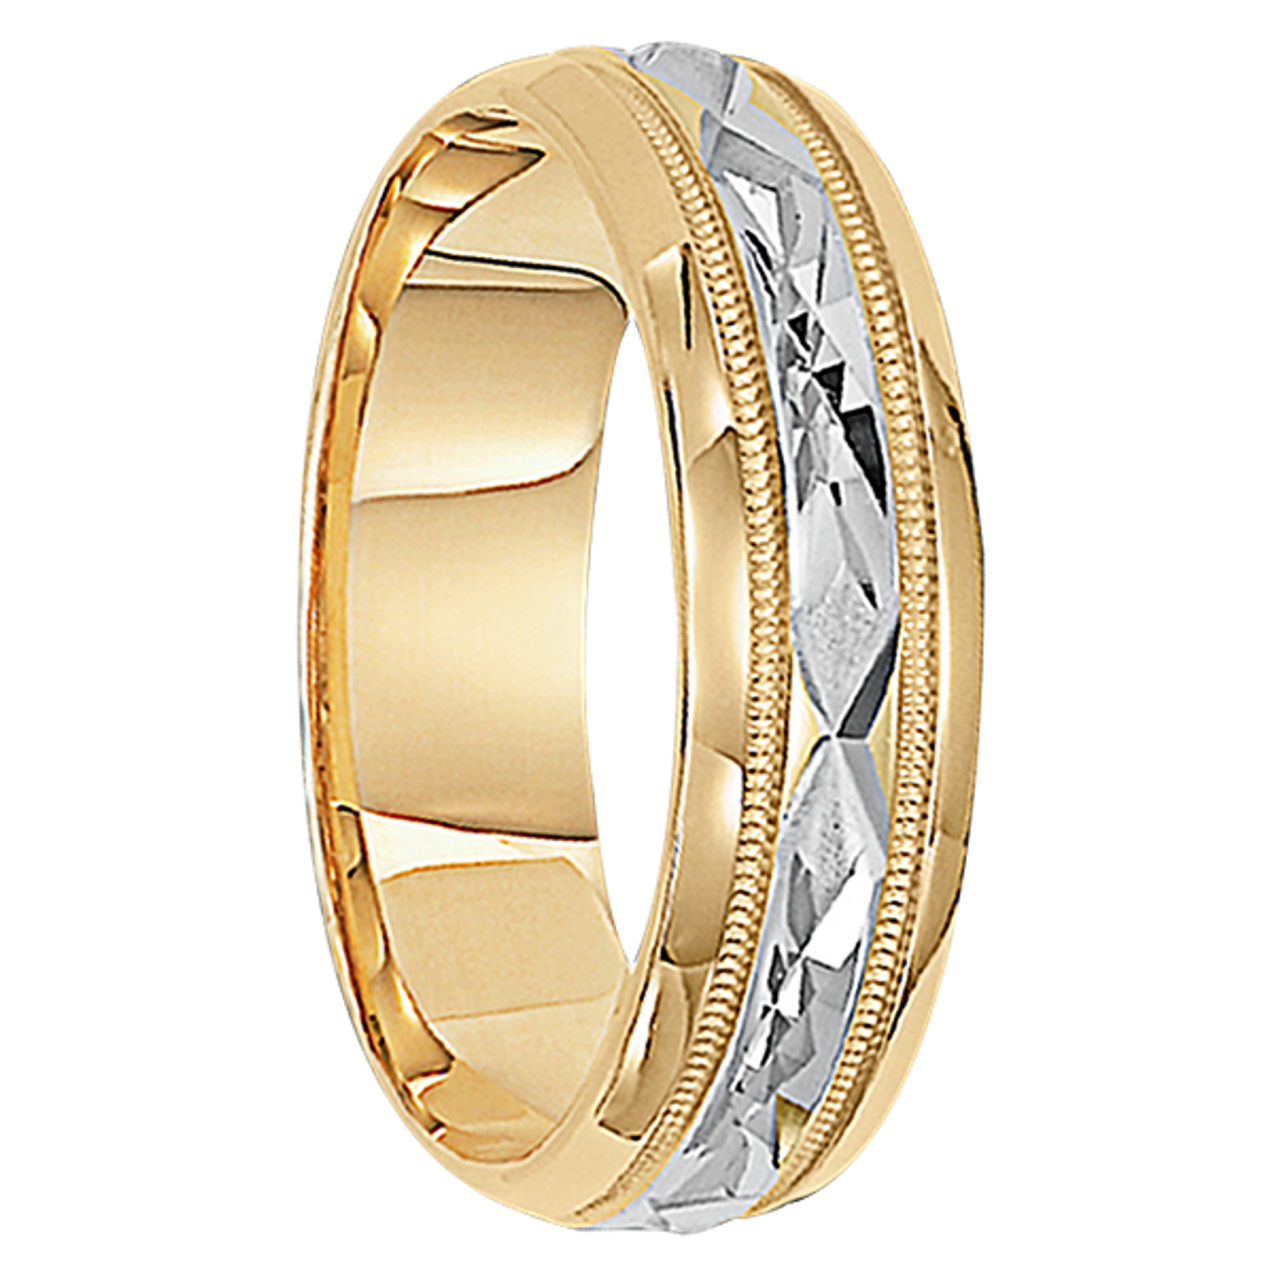 6mm Unique Mens Wedding Bands In 10kt Two Tone Gold Dublin 10